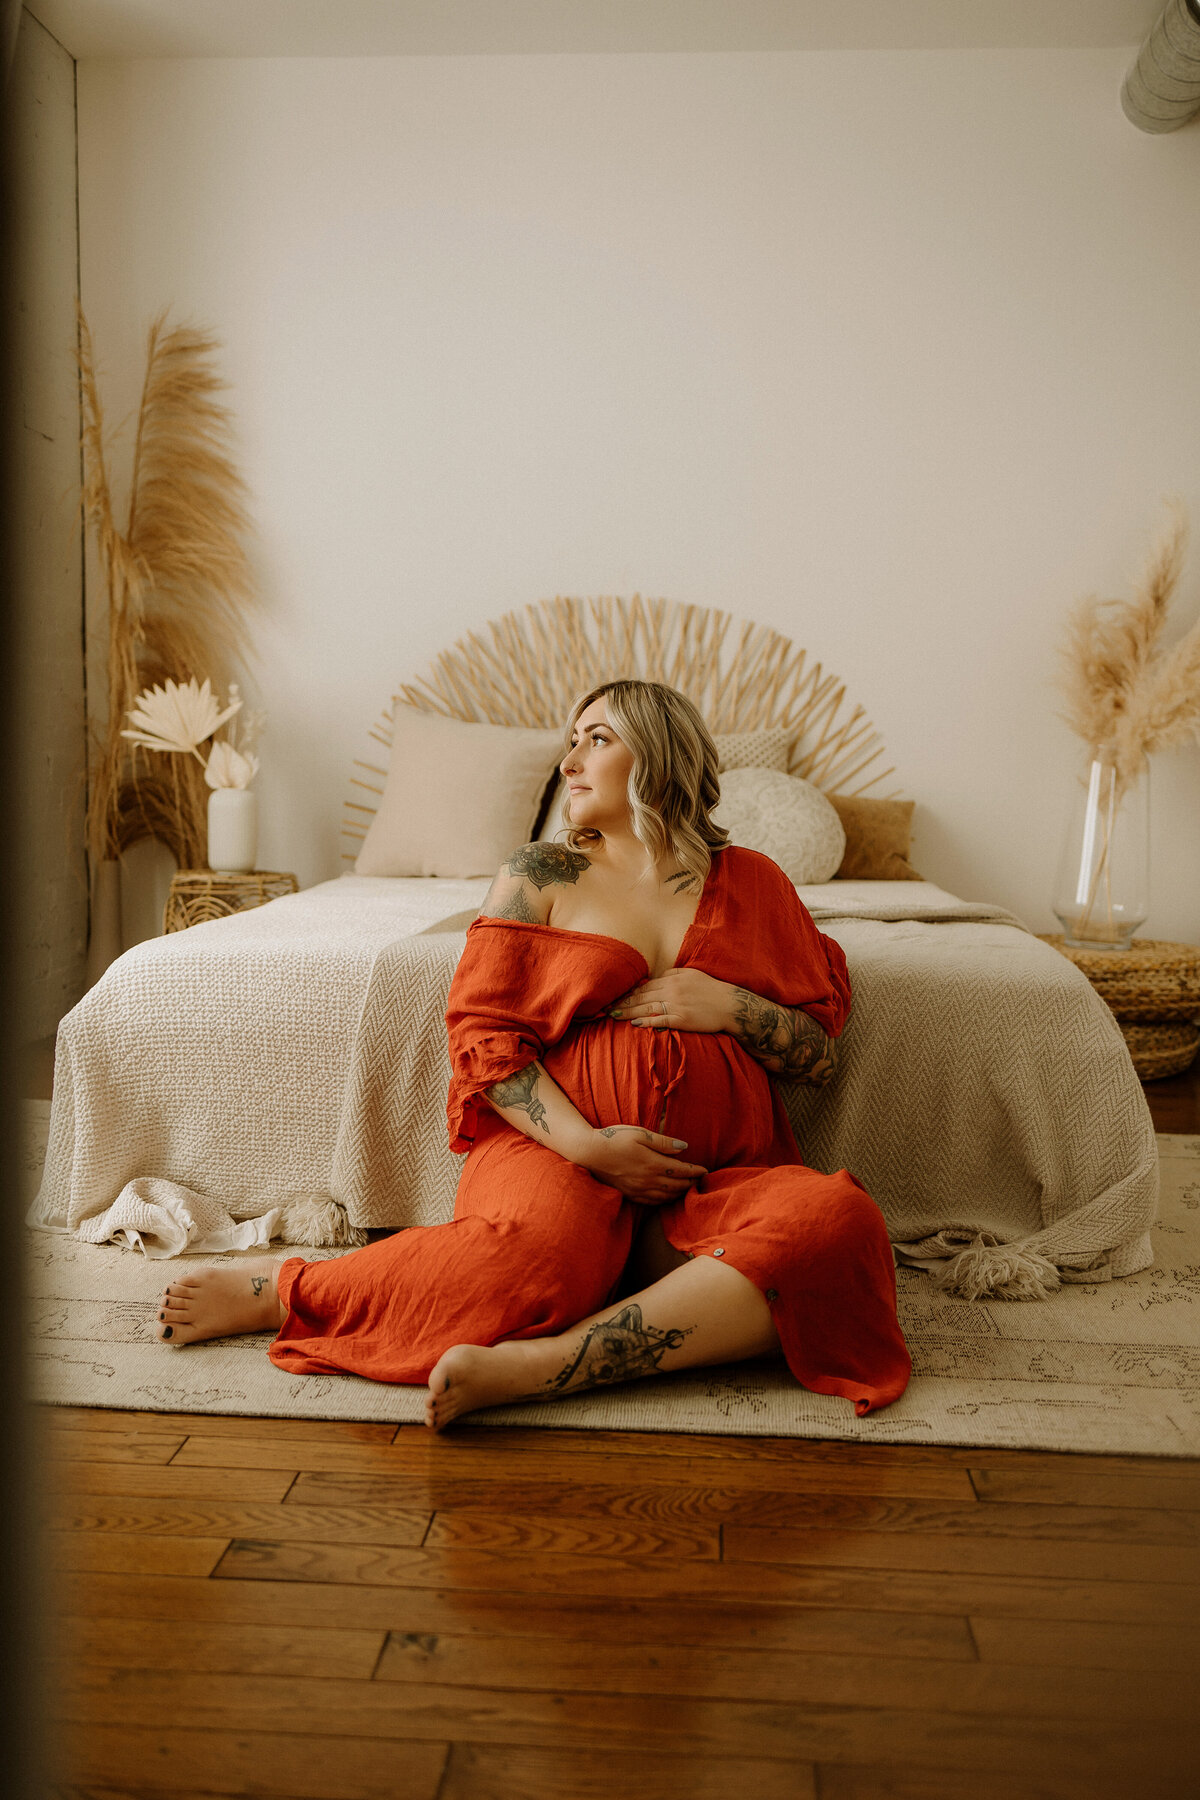 Discover the legacy of breathtaking maternity portraits created by Haley Skof Photography in Calgary. Leave your mark with bold and unforgettable images.